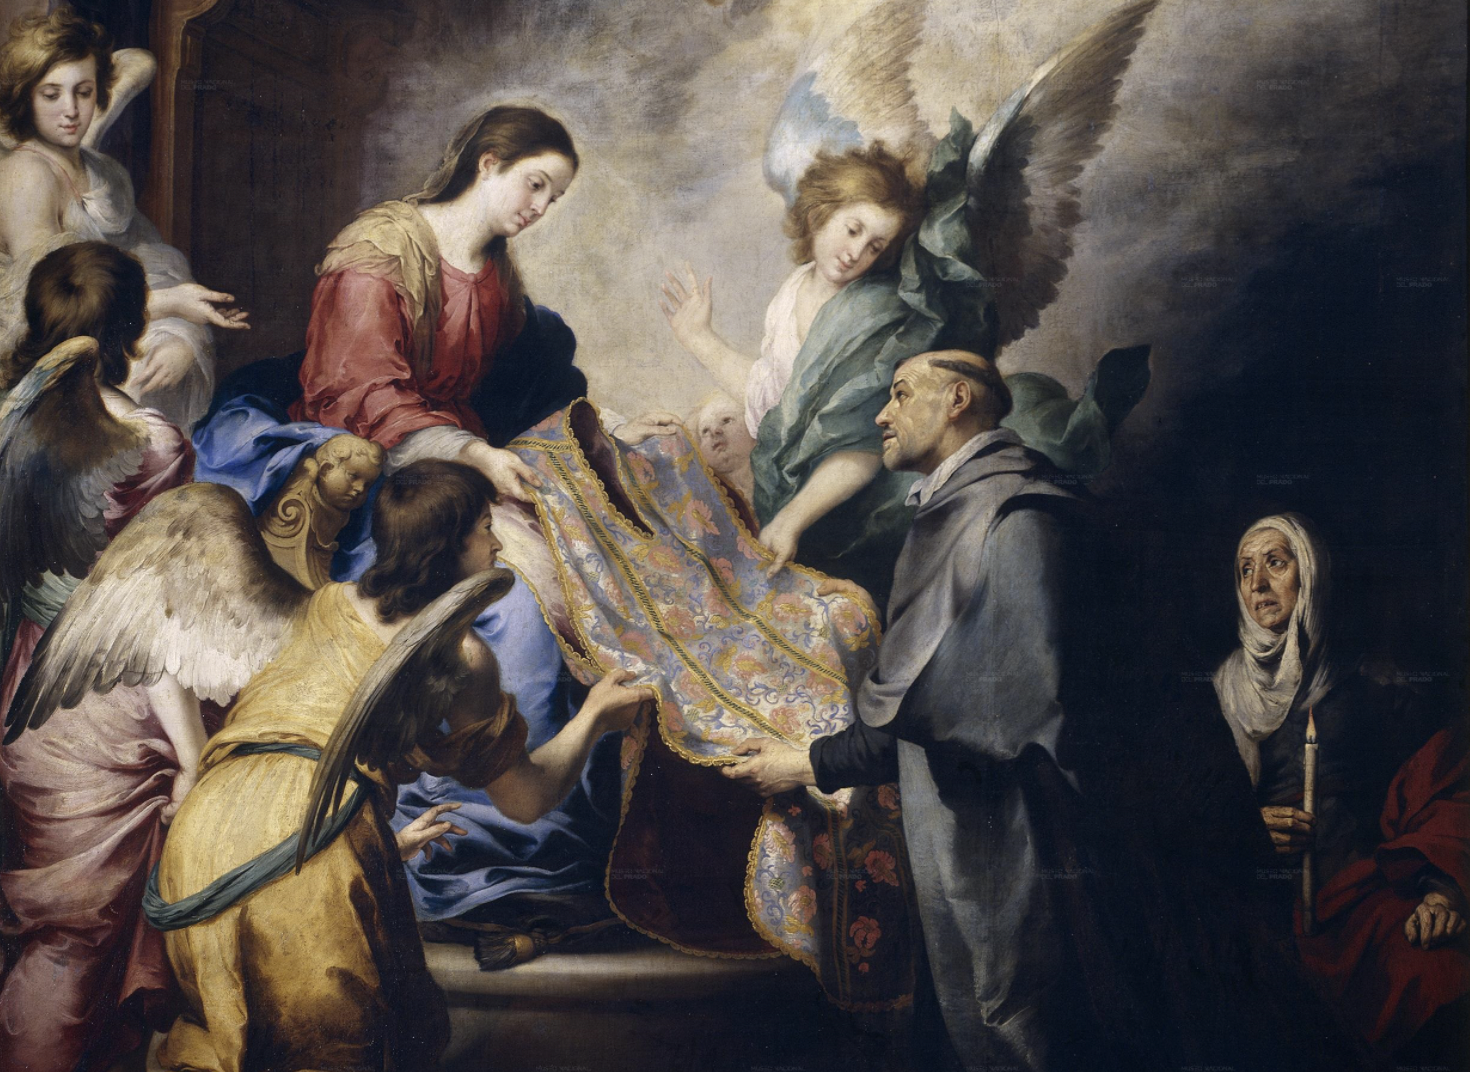 Apparition of the Virgin to St. Ildefonsus, (1660) by Bartolomé Esteban Murillo - Public Domain Catholic Painting